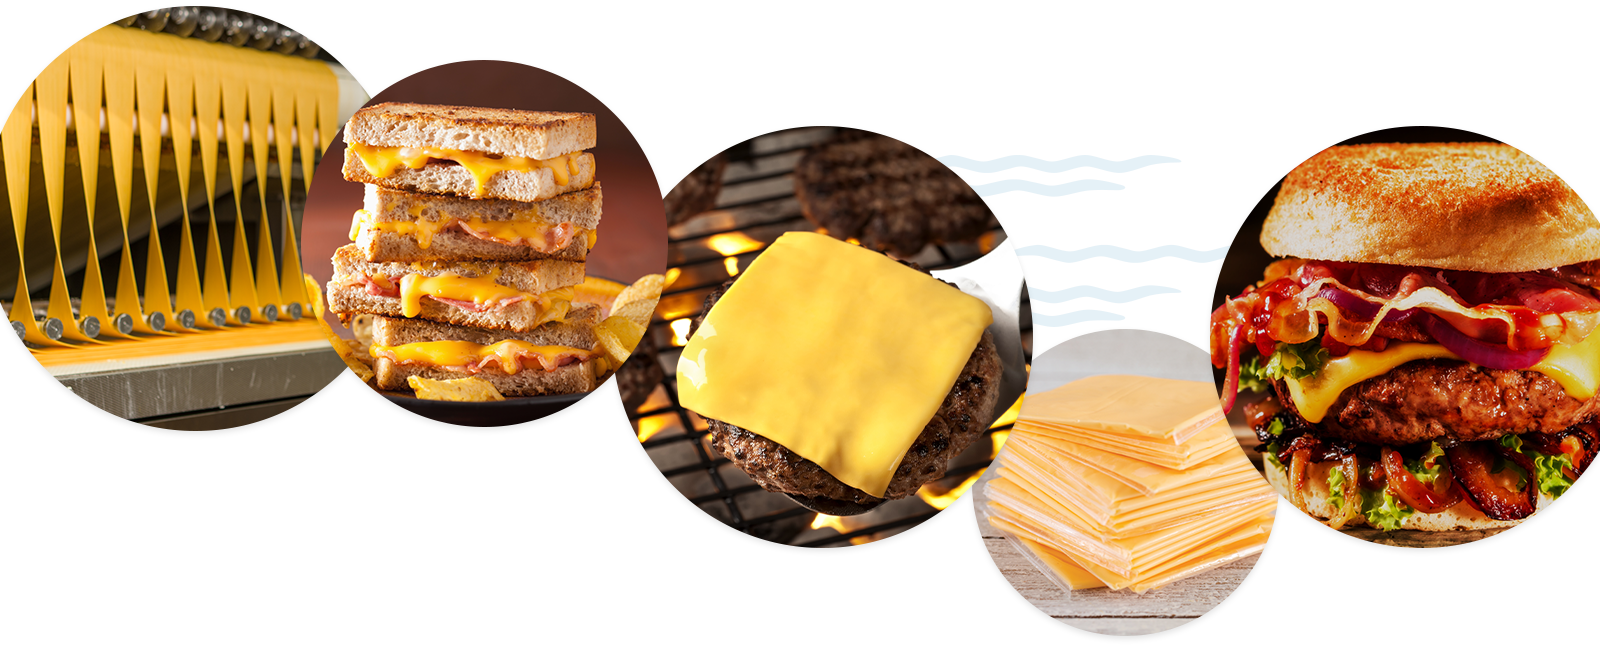 An assortment of processed cheese on sandwiches and by itself